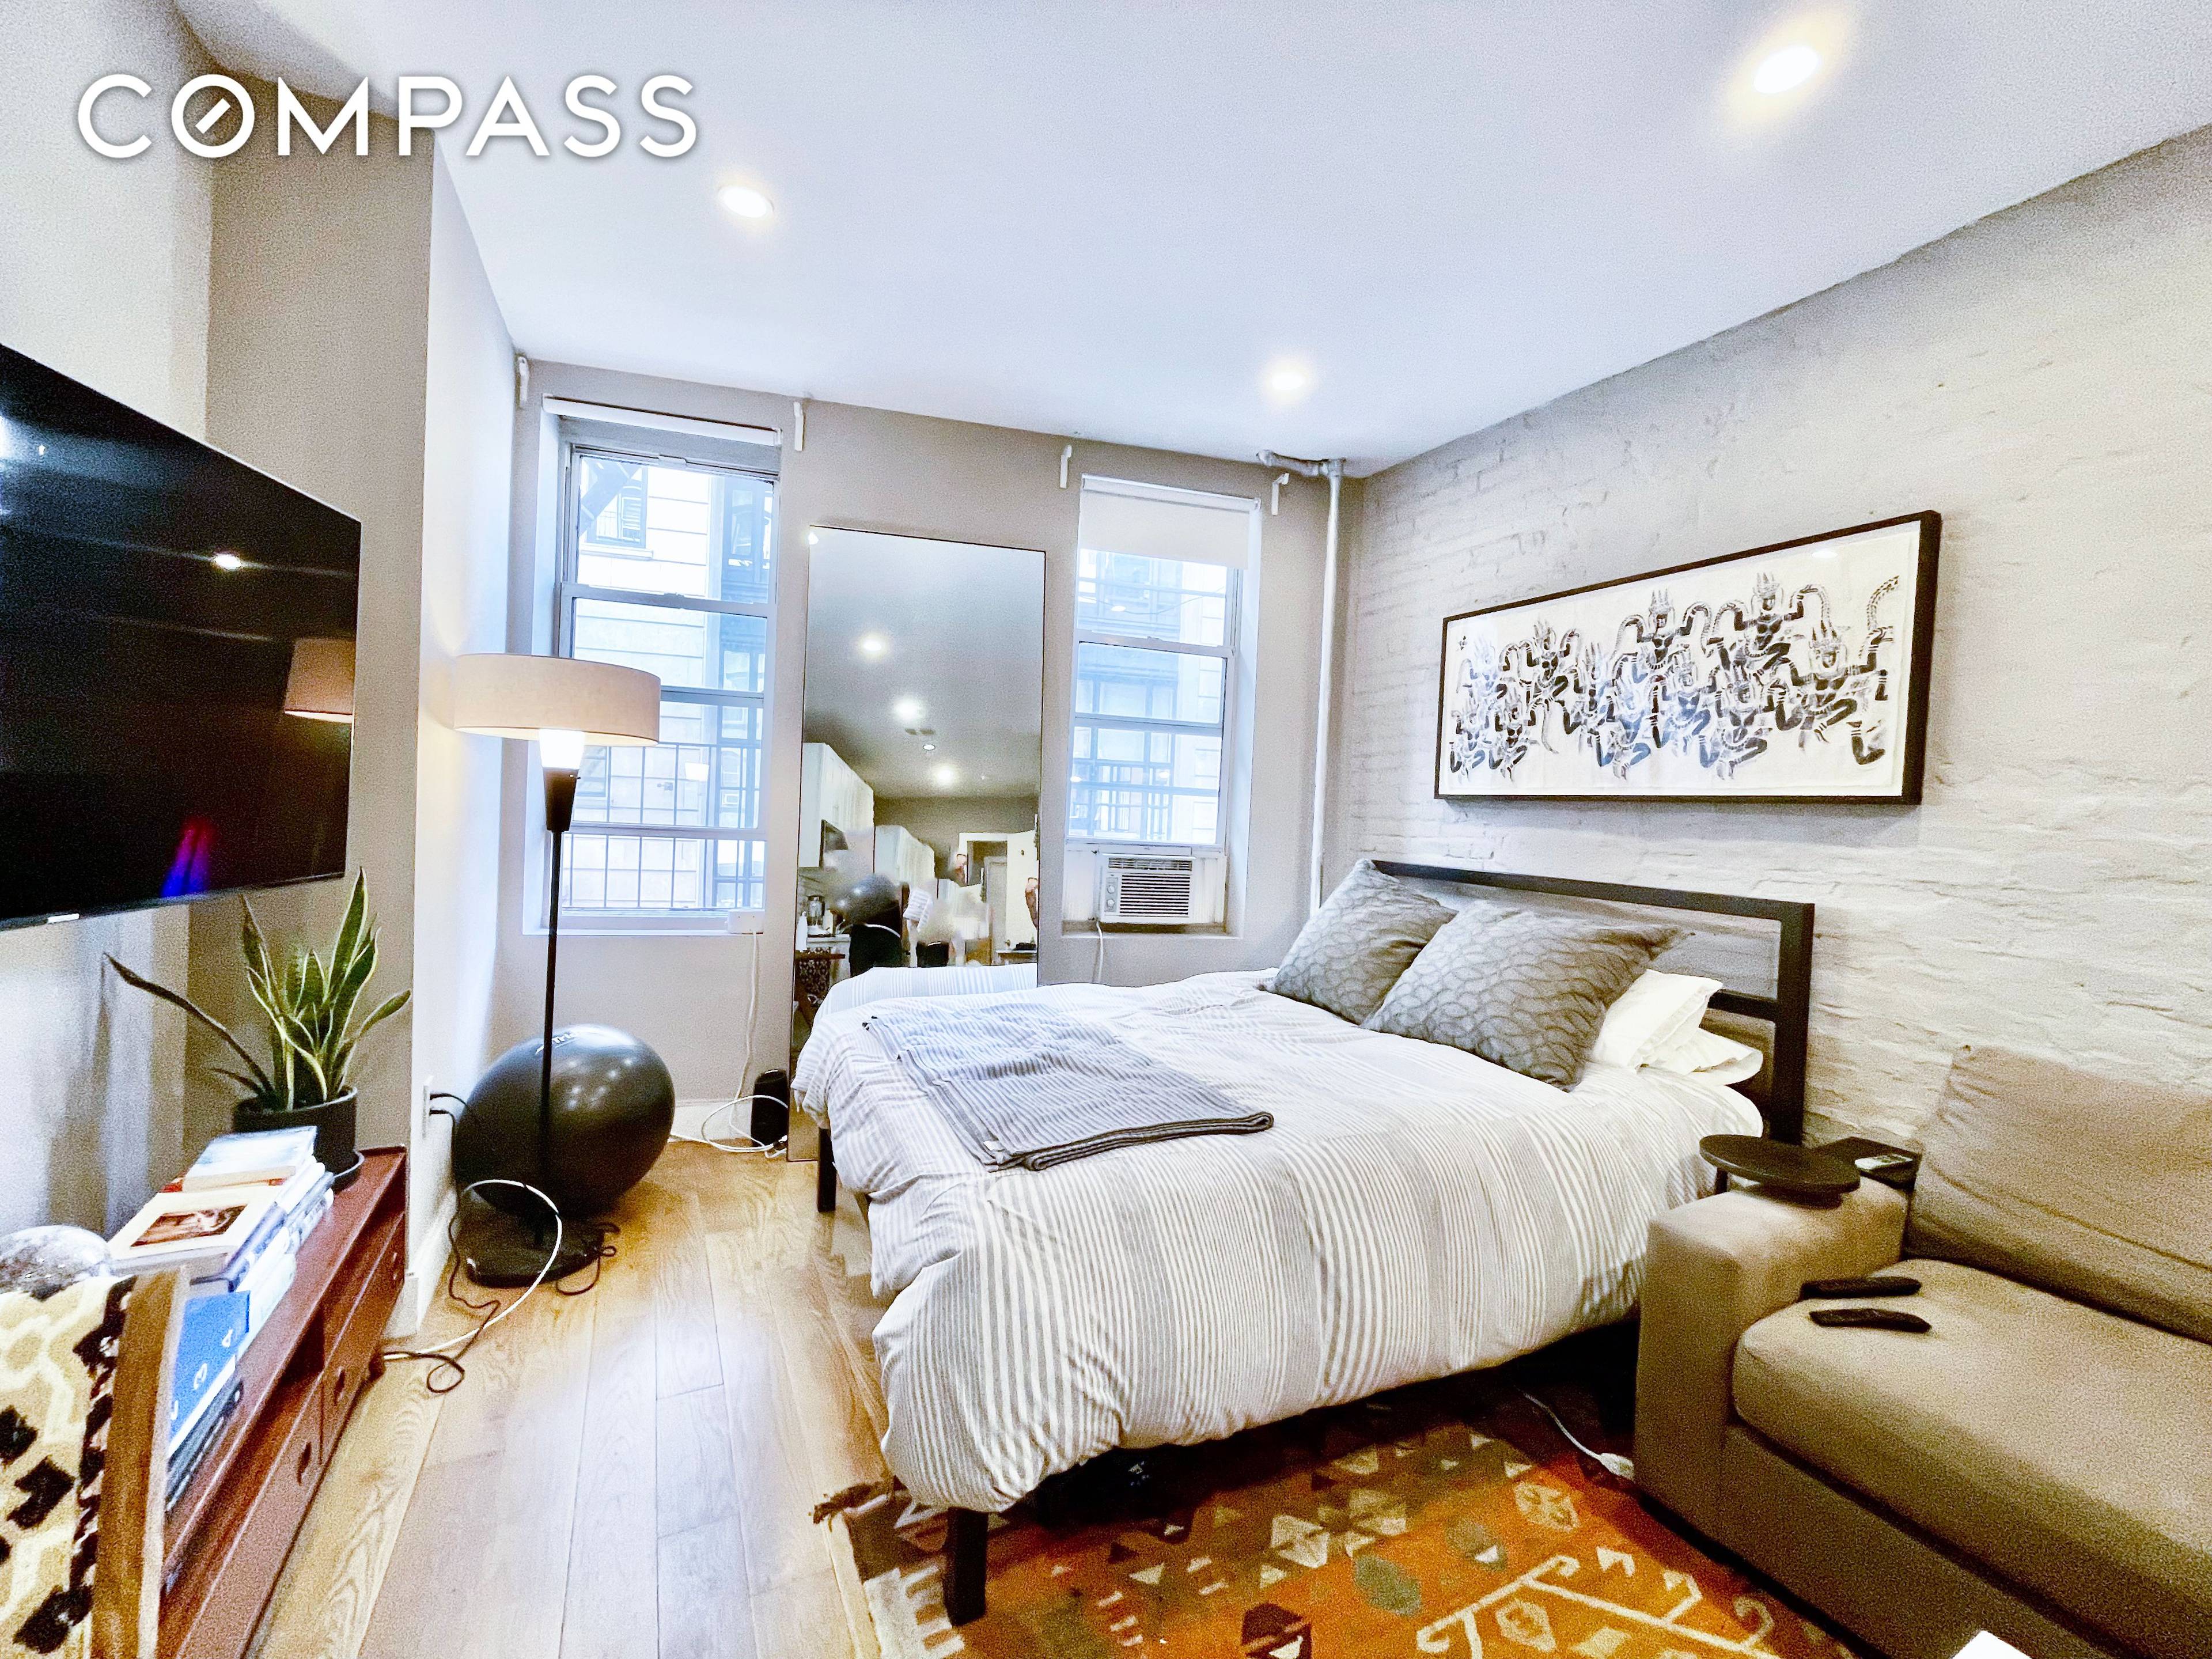 Prime Nolita SoHo Renovated Studio Home Office with W D in unit Renovated kitchen and stainless steel appliances.